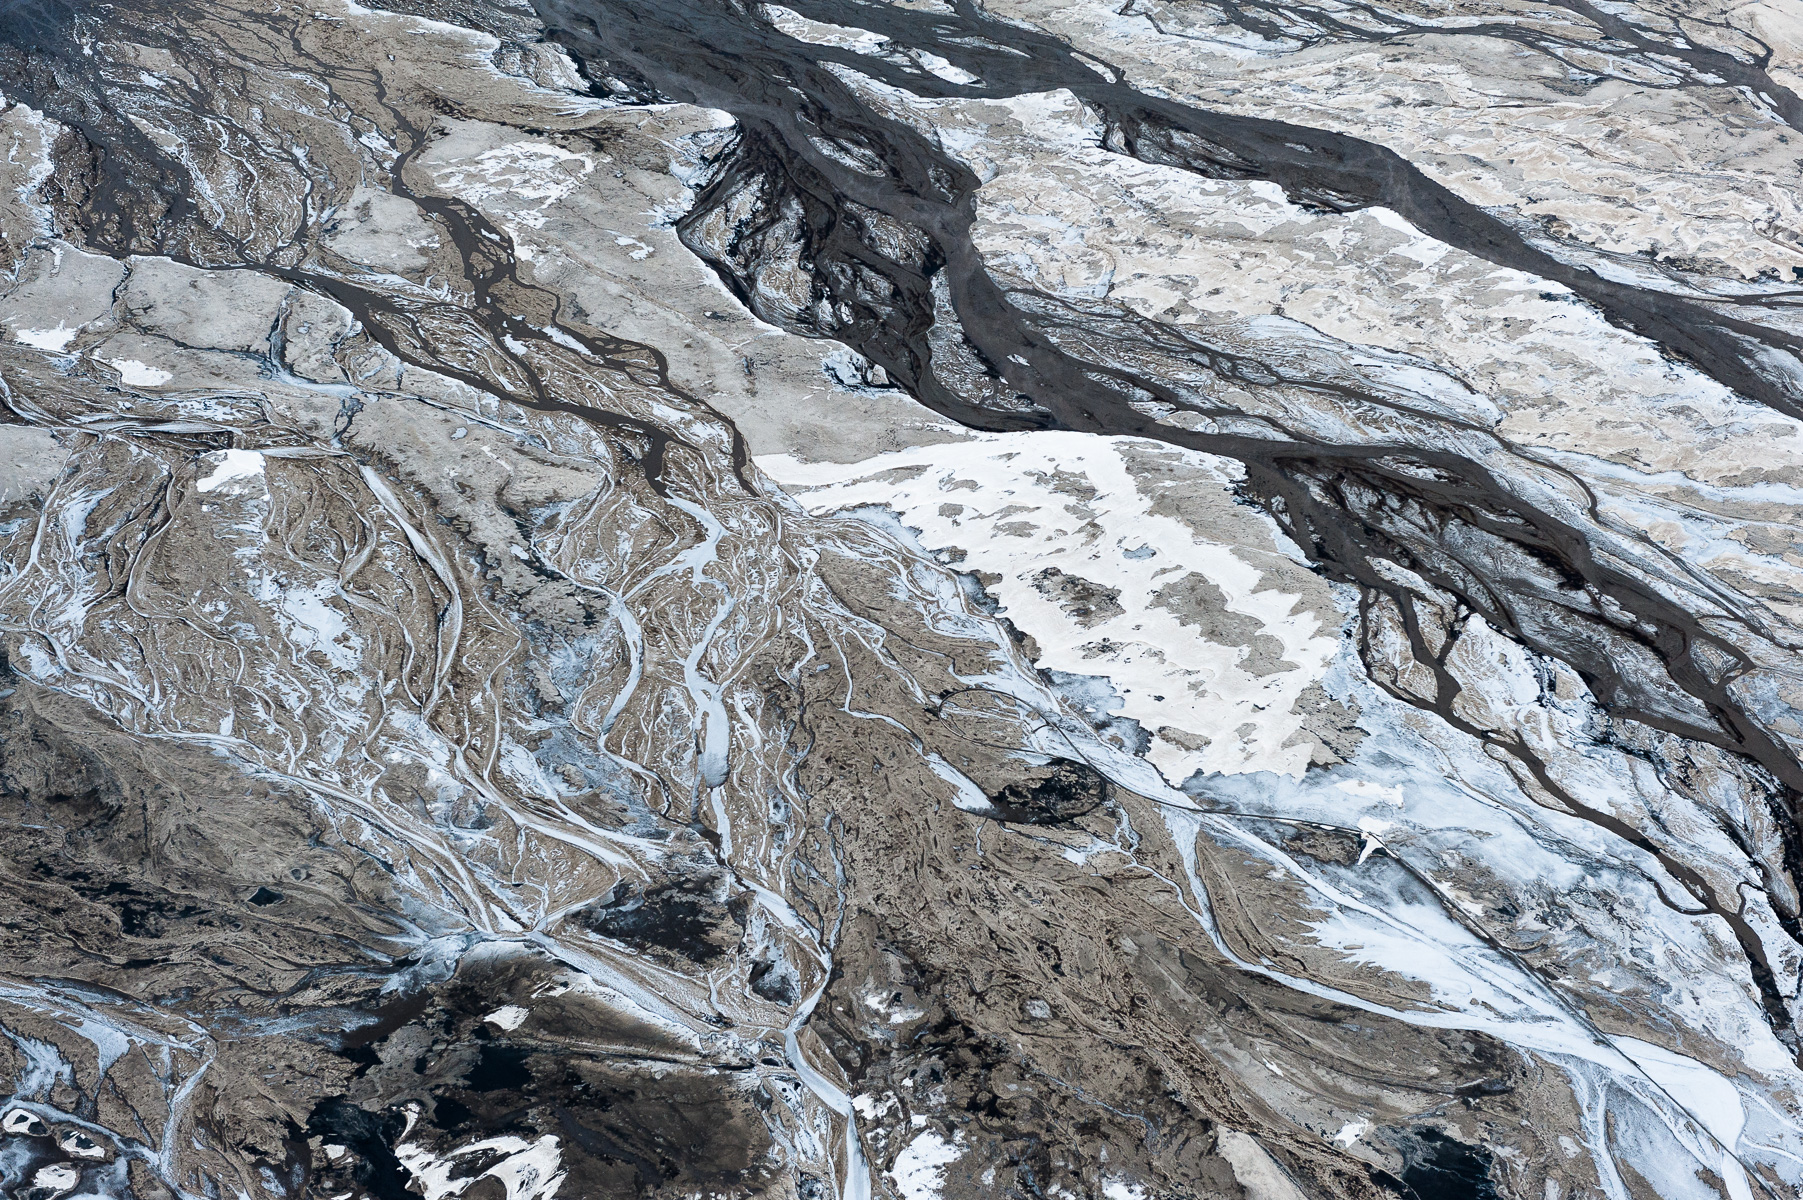 Even in the extreme cold of the winter, the toxic tailings ponds do not freeze. On one particularly cold morning, the partially frozen tailings, sand, liquid tailings and oil residue, combined to produce abstractions that reminded me of a Jackson Pollock canvas.